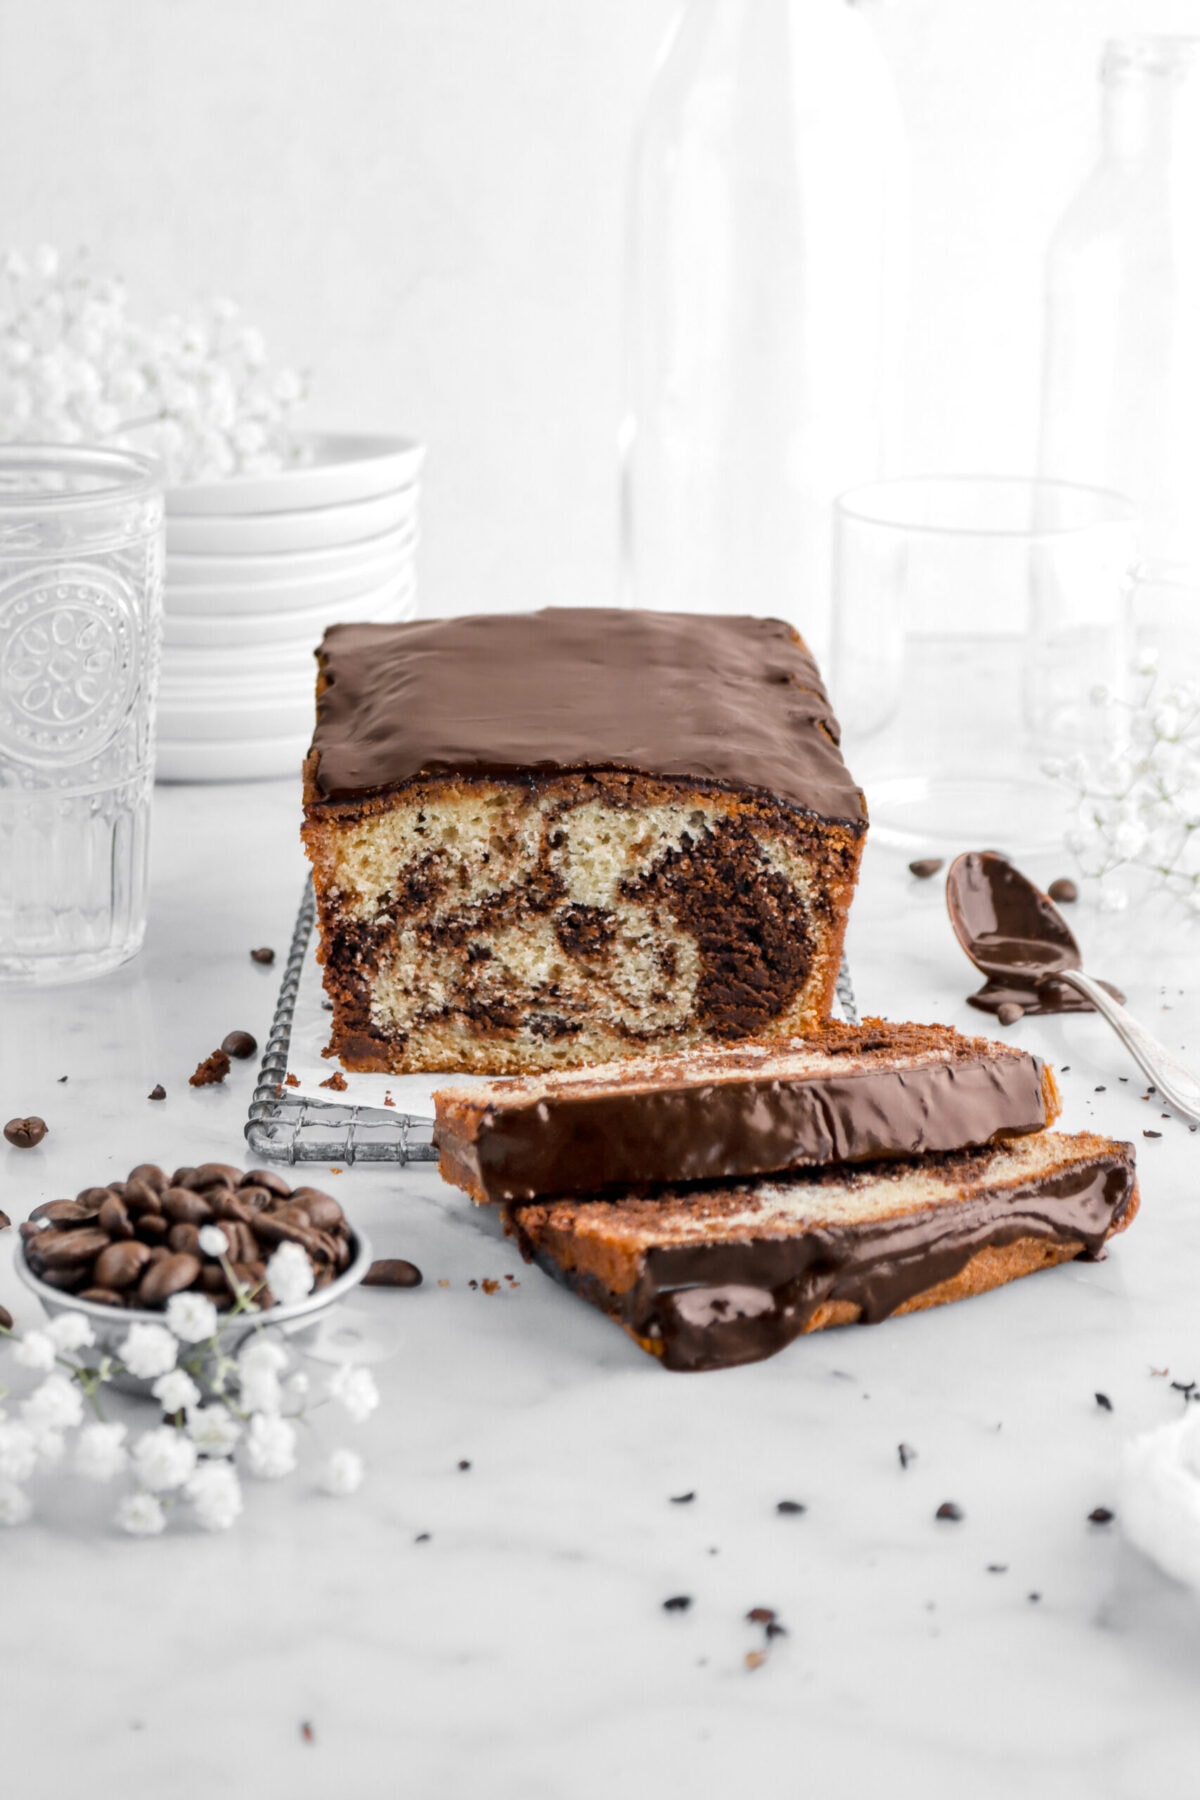 chocolate marble cake on parchment lined wire tray with two slices laying on front with spoon of chocolate icing and bowl of coffee beans beside with more coffee beans scattered around, white flowers, a stack of plates, and empty glasses around.